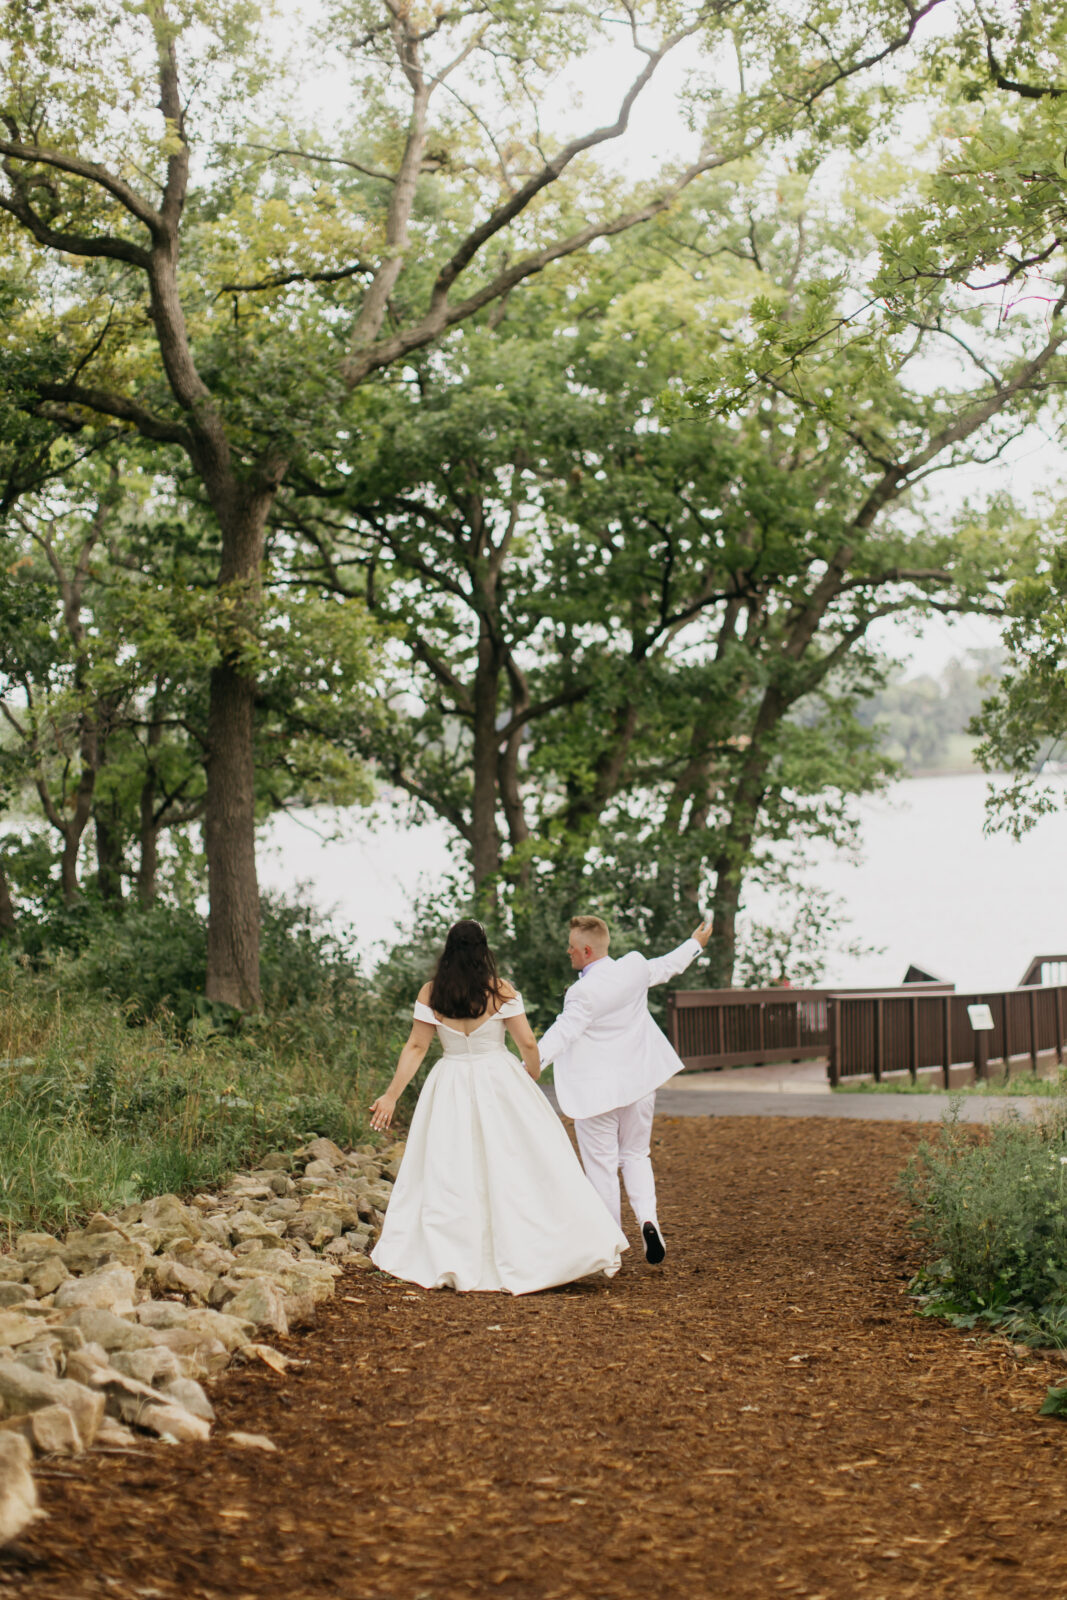 A lovely photo of the bride and groom on their wedding day with the nature as the background for the shoot